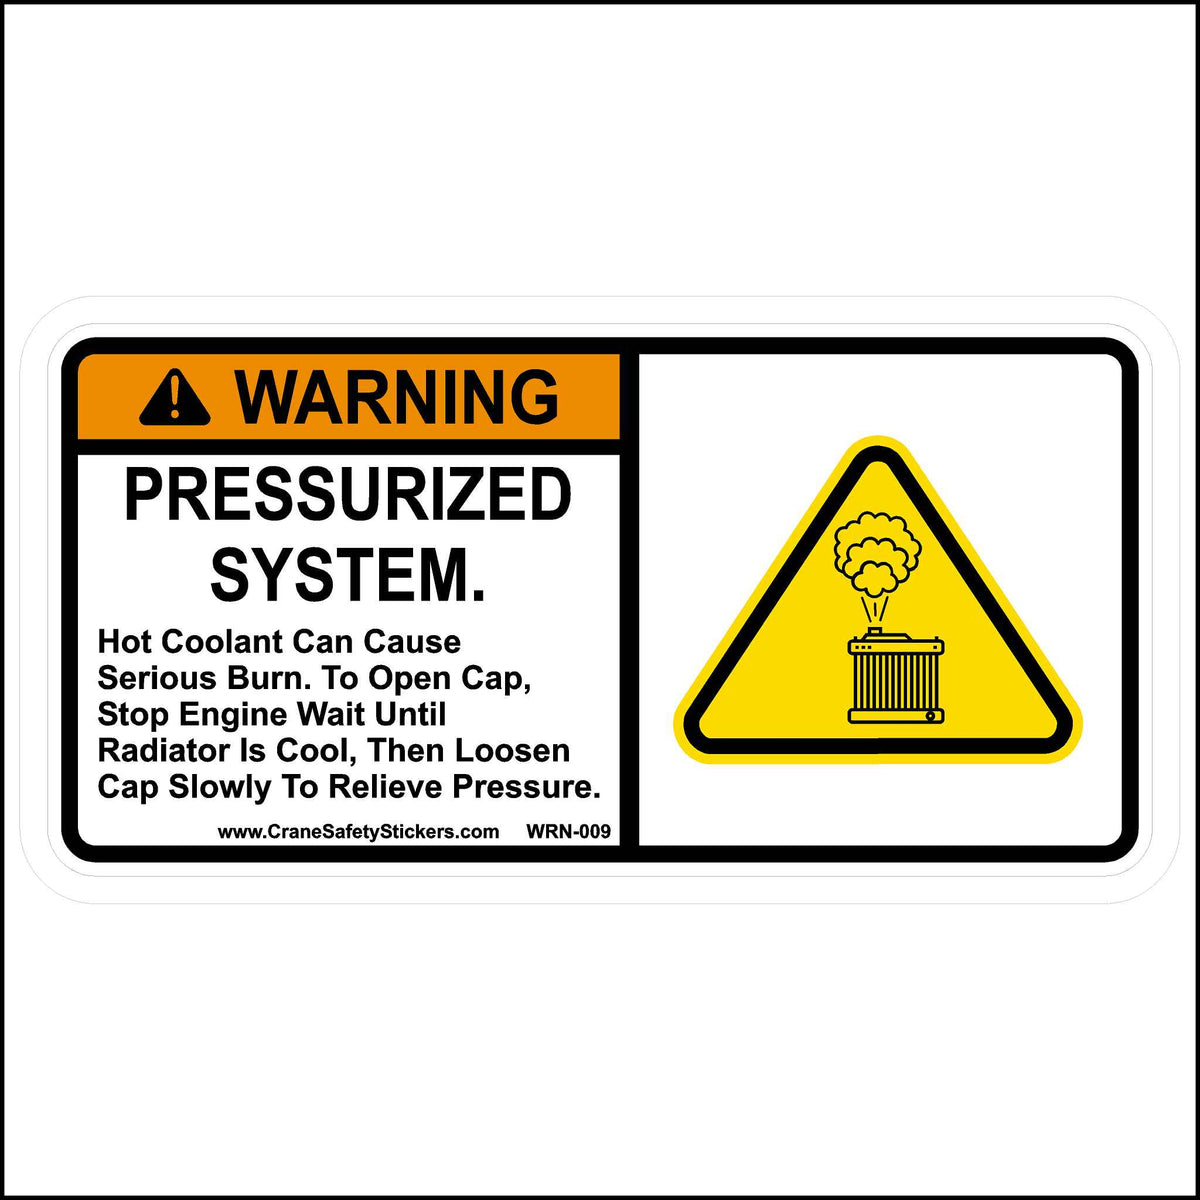 This Warning Pressurized System Safety Sticker Is Printed With. Warning Pressurized System. Hot Coolant Can Cause Serious Burn. To Open the Cap, Stop the Engine and Wait Until the Radiator Is Cool, Then Loosen the Cap Slowly to Relieve Pressure.